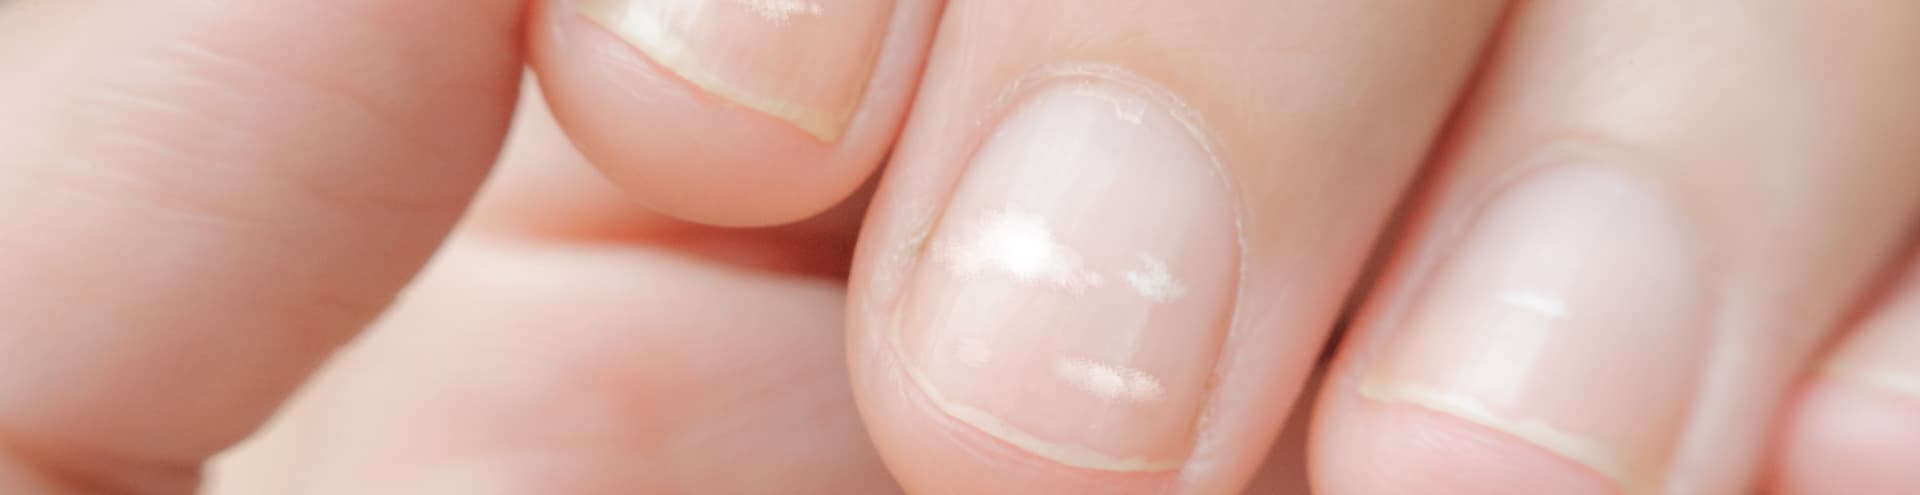 Nutrition and nail disease  ScienceDirect